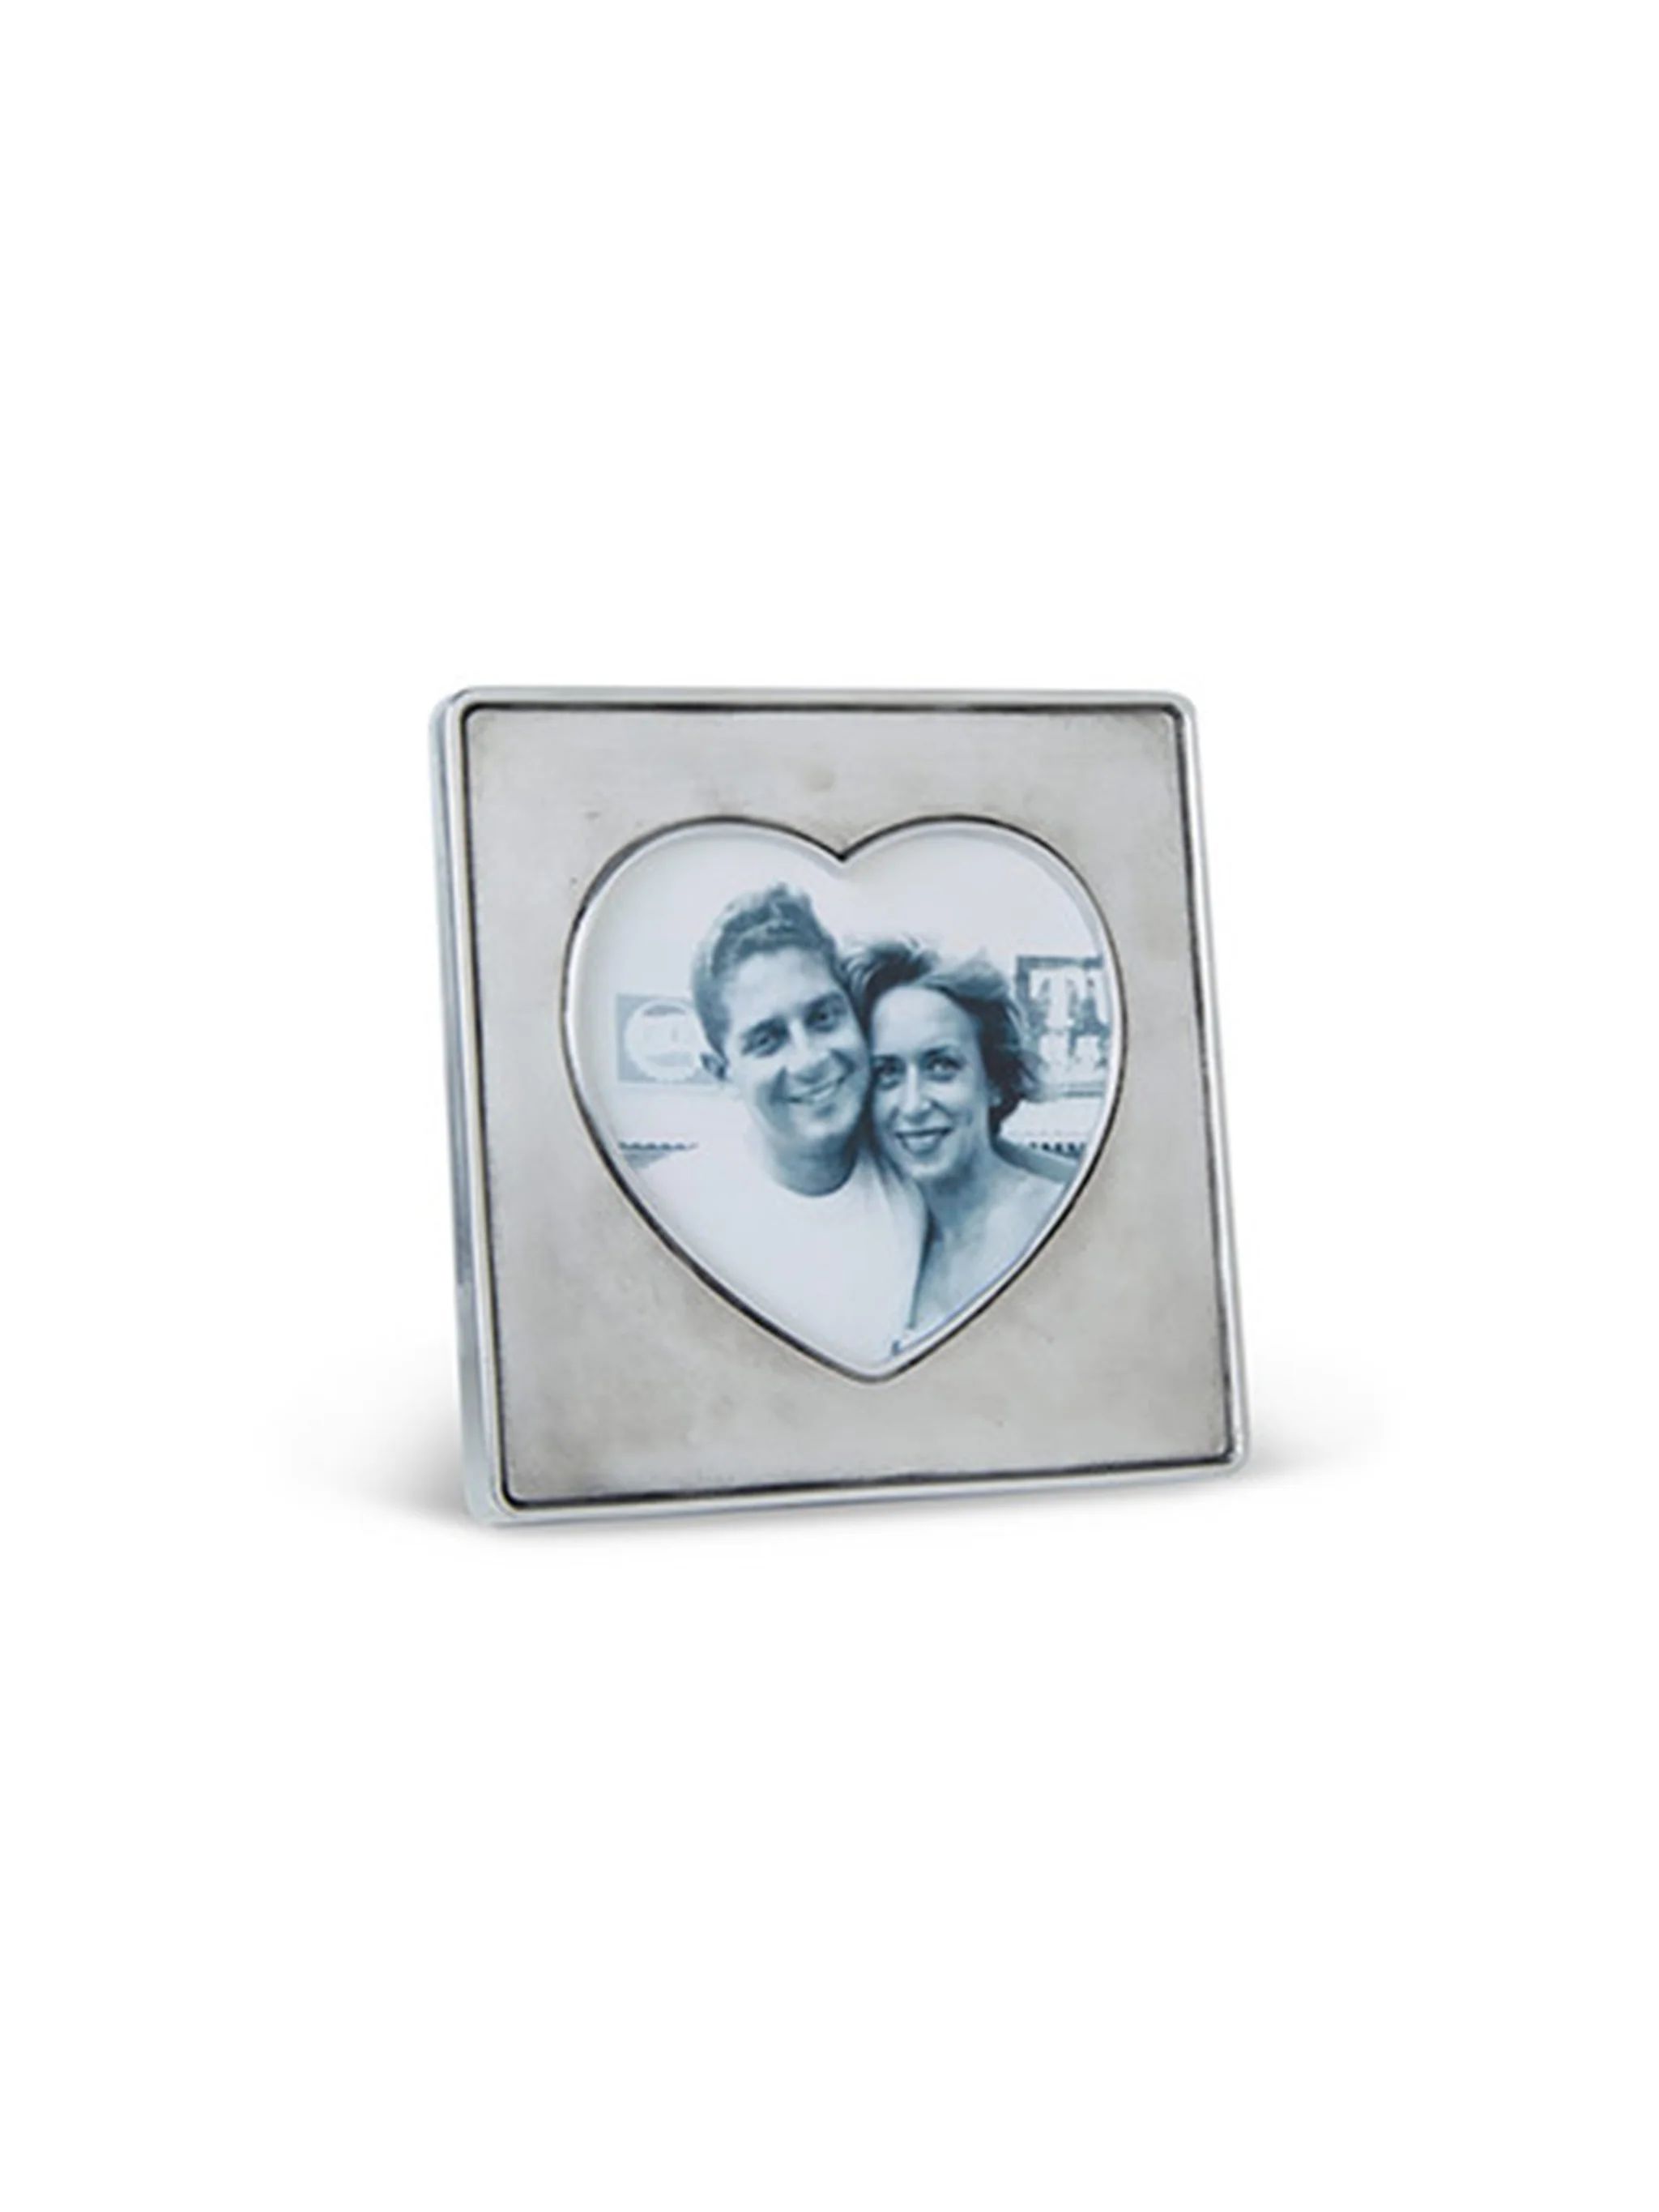 MATCH Pewter Heart In Square Frame | Weston Table